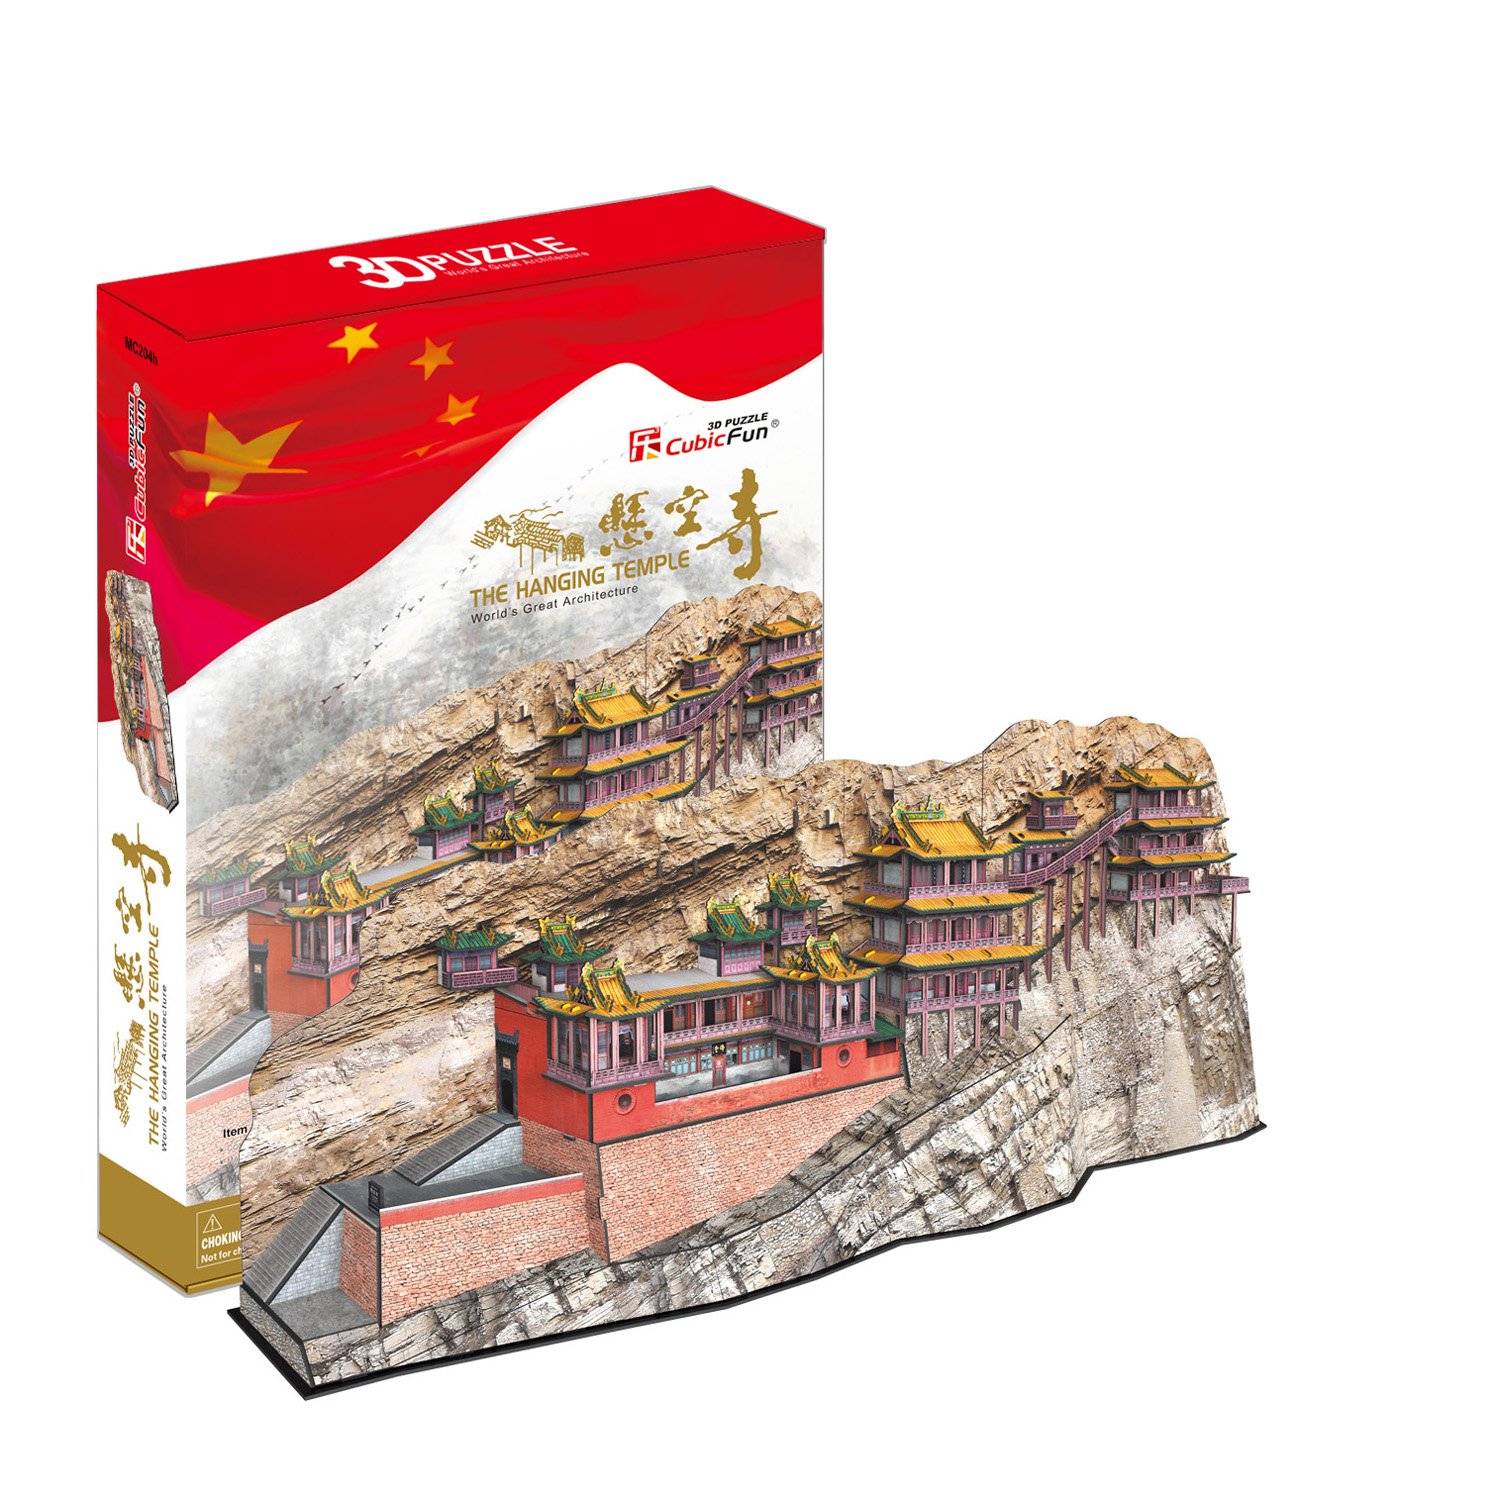 Cubic Fun 3D Puzzle Hanging Temple China Monastery Rock Monastery Temple